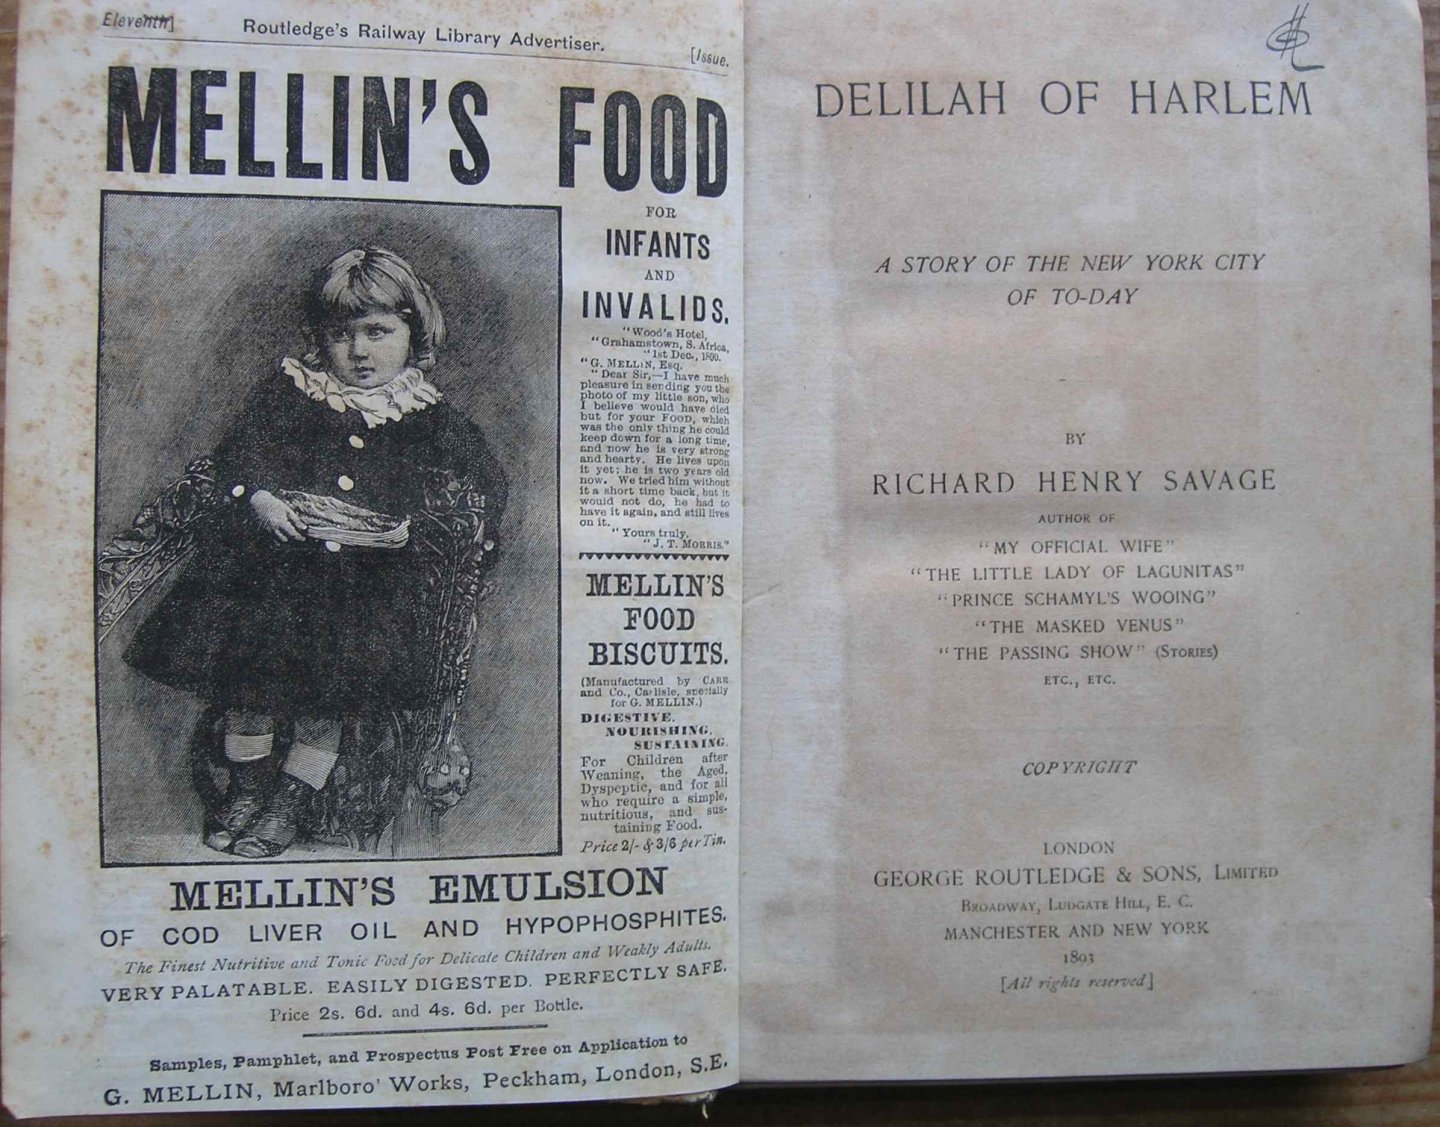 Savage,  Richard Henry - Delilah of Harlem - A Story of the New York City of To-day